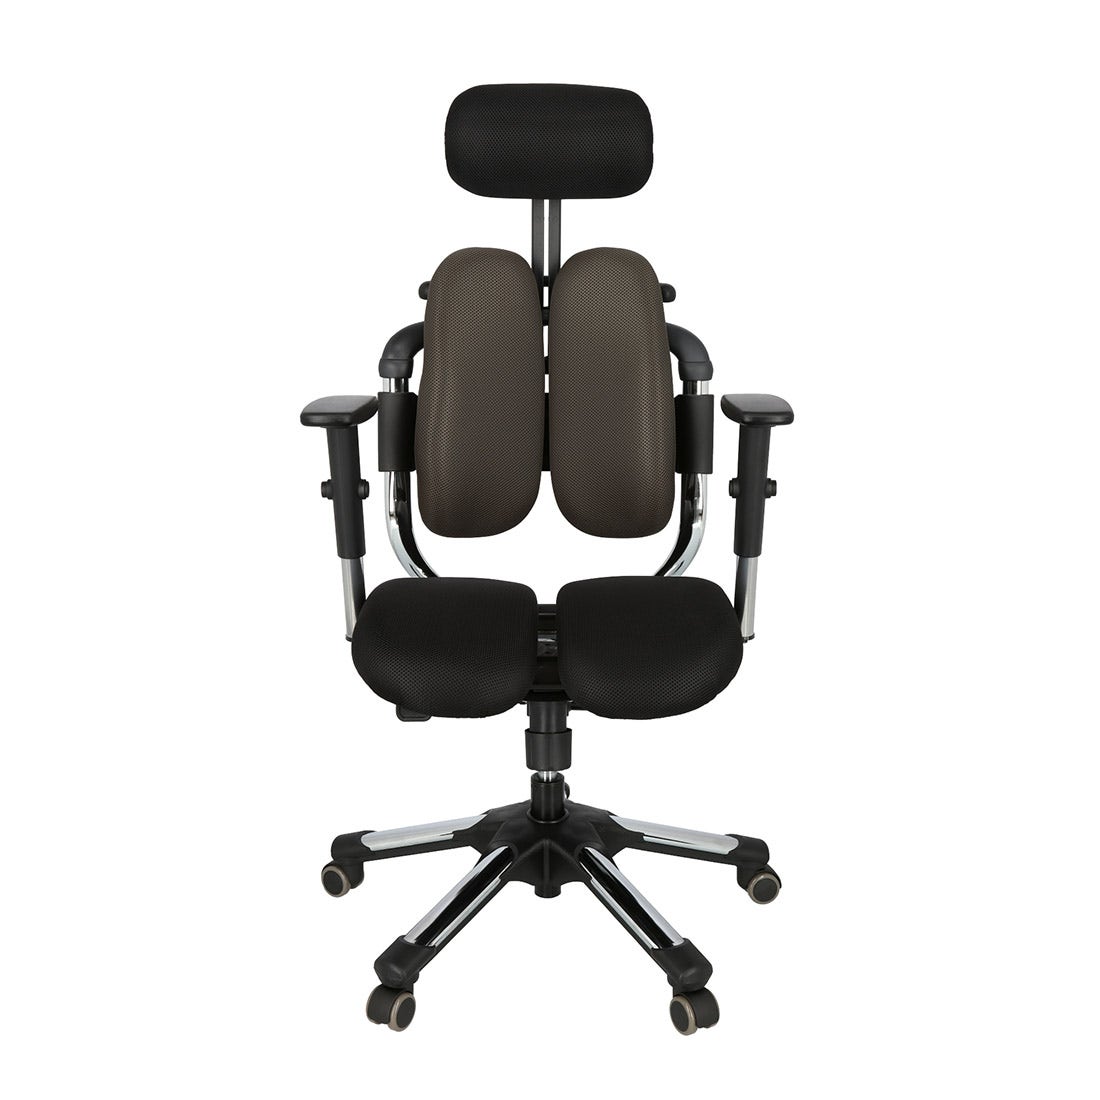 39014937-furniture-home-office-gaming-office-chair-01